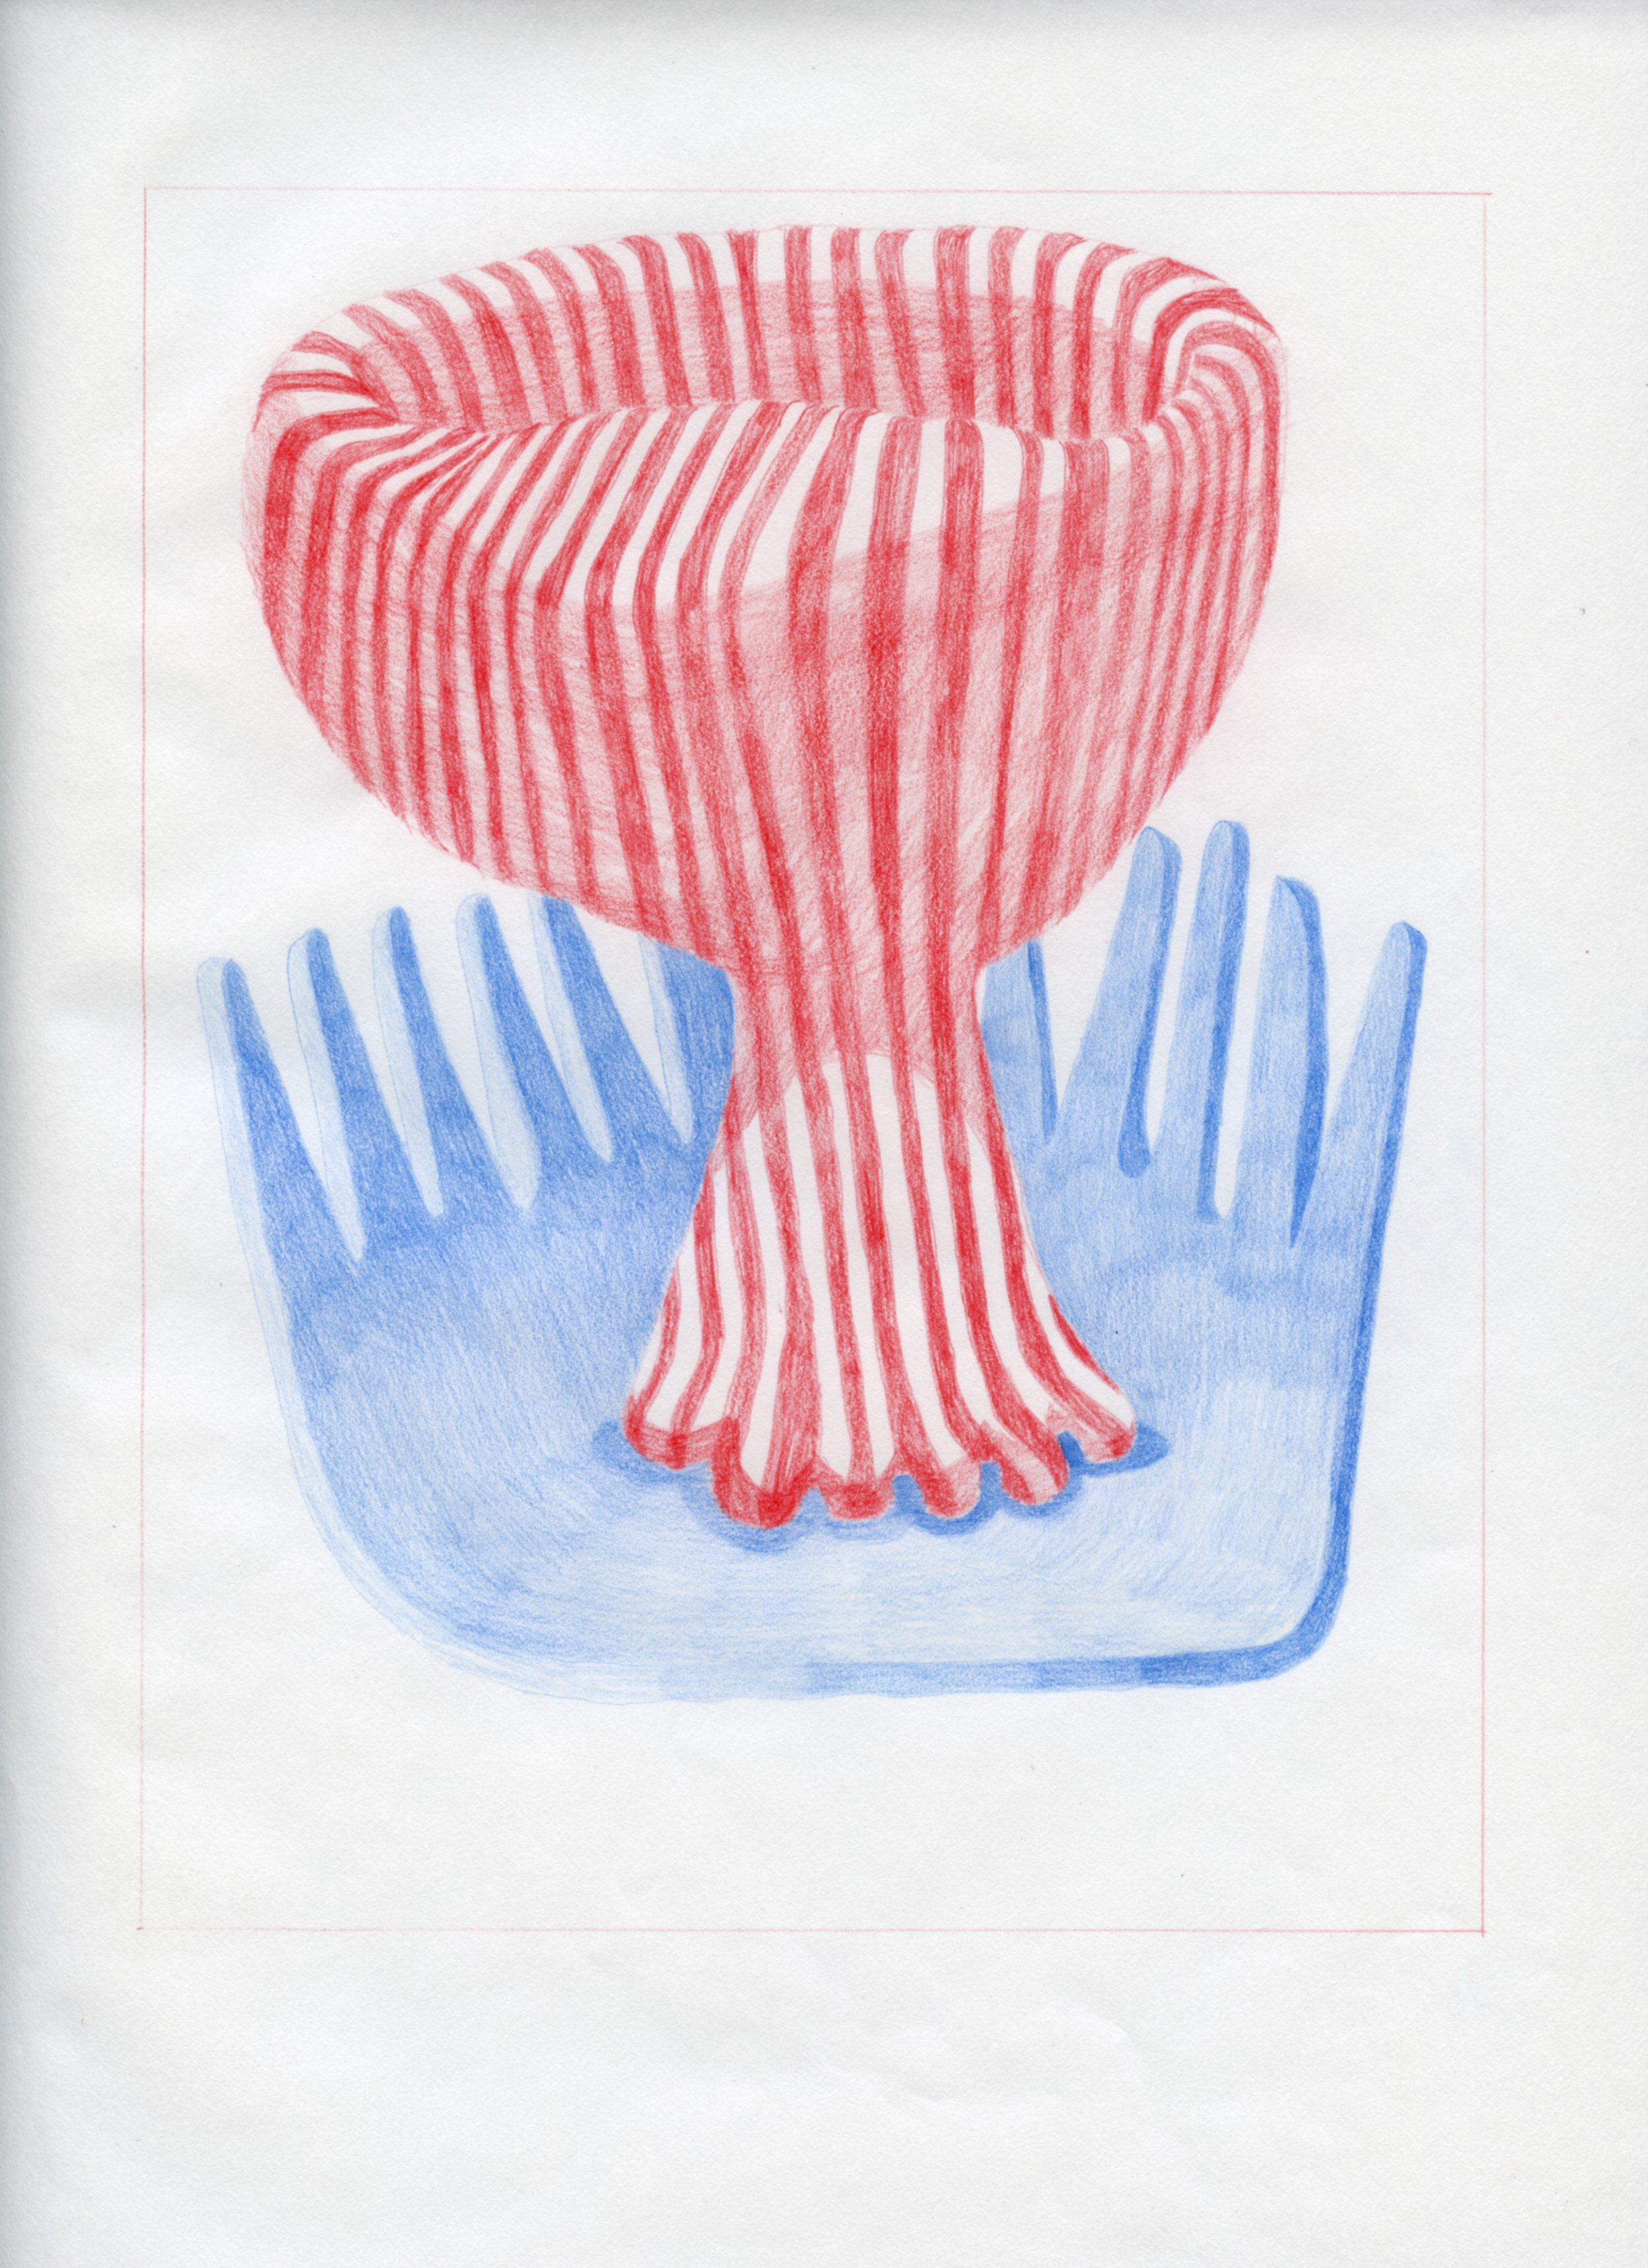  Workplace Drawing #3, 2021, Red and Blue Graphite on Bond Paper, 9”x 12”. 